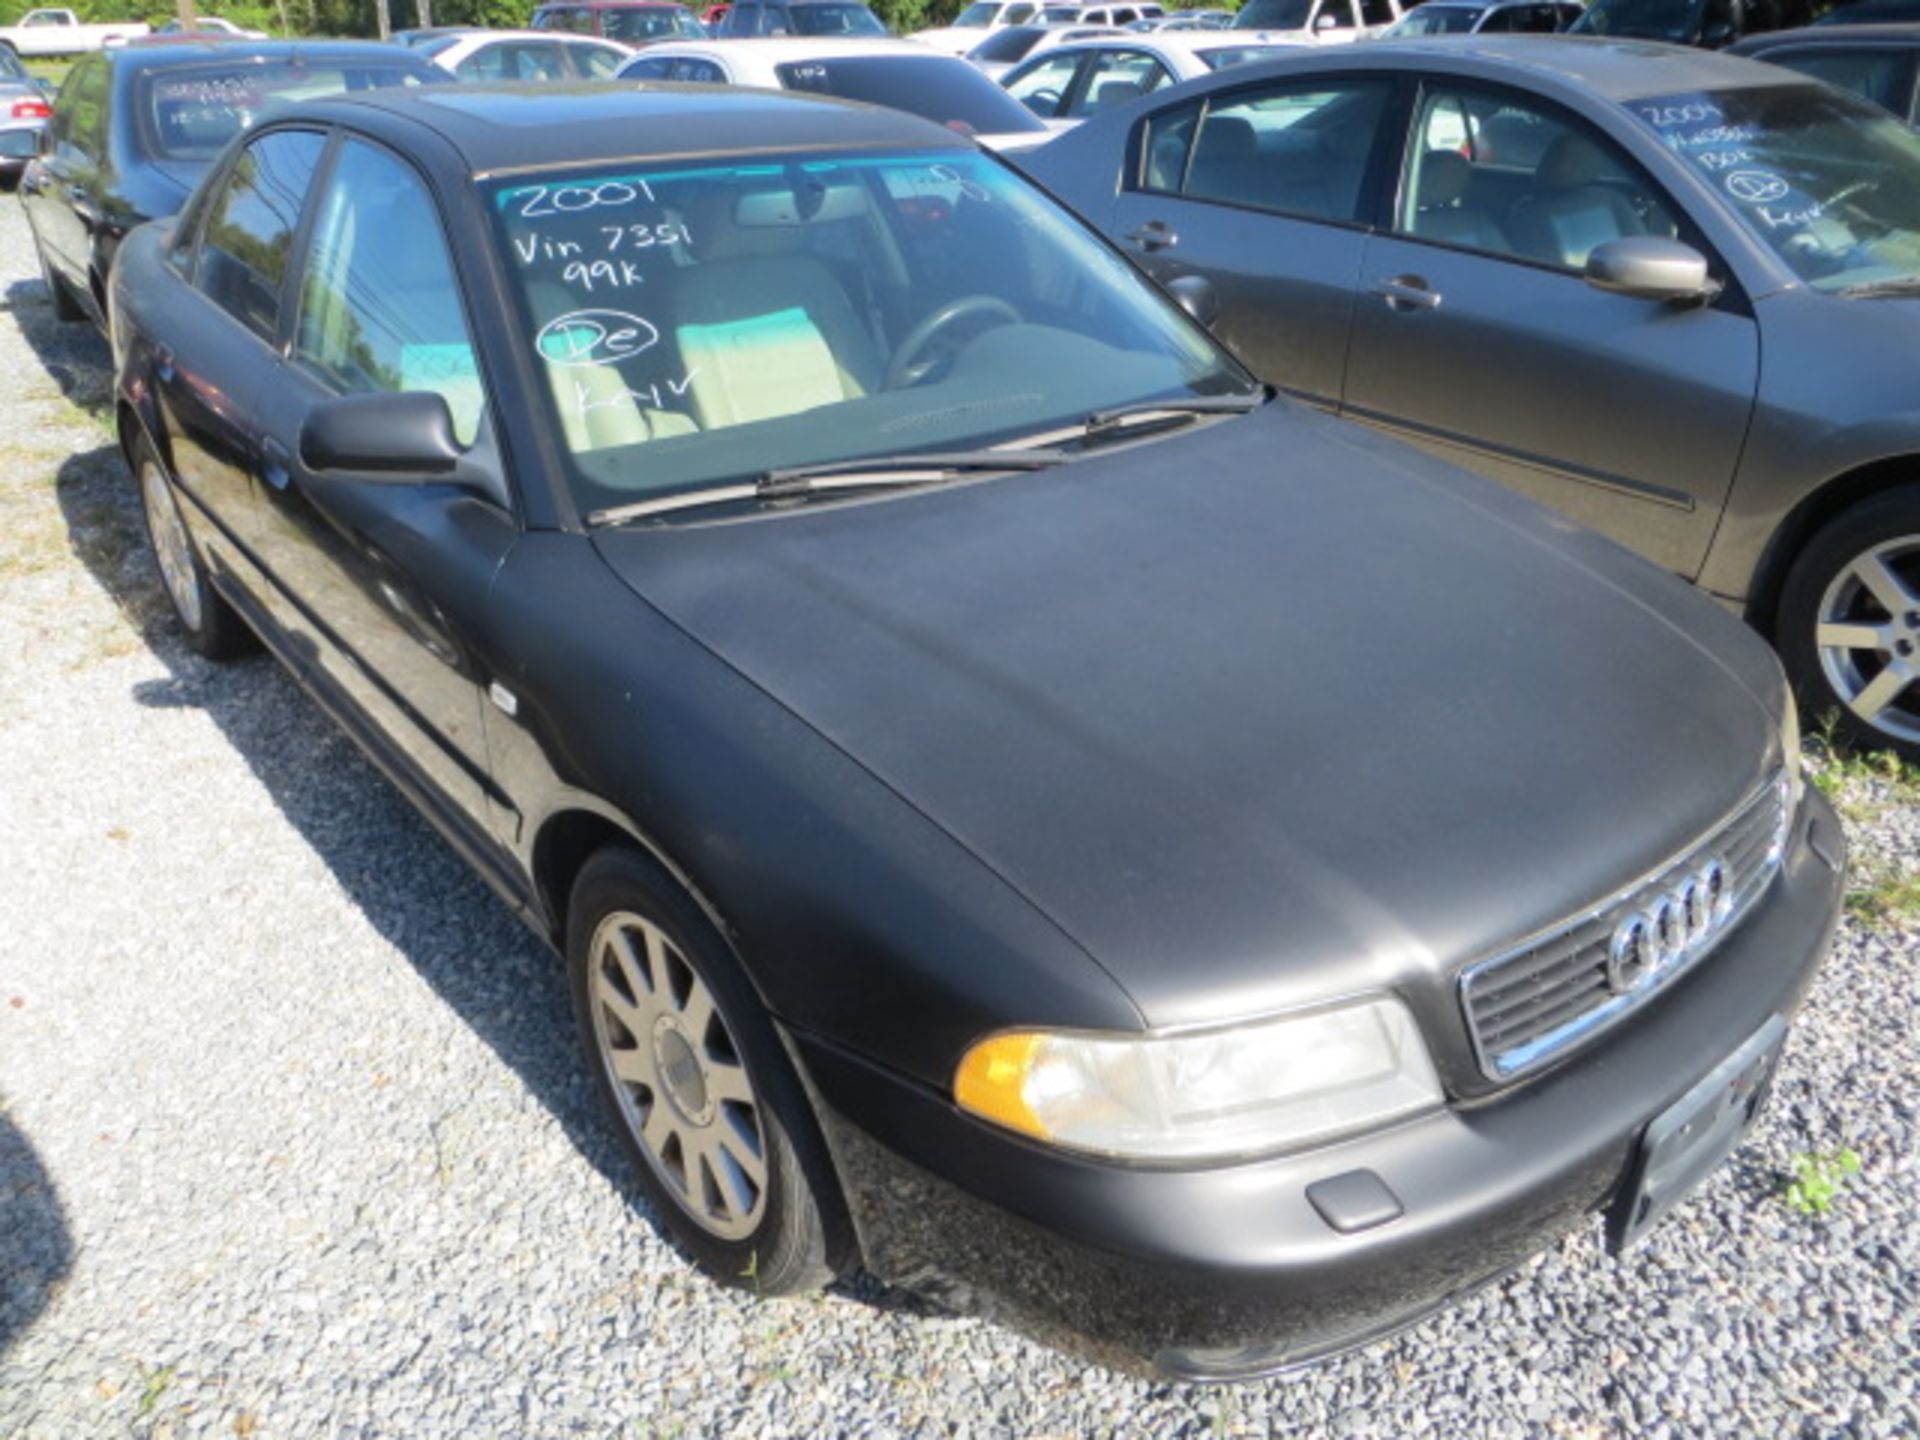 2001 Audi A4 1.8 QUATTRO-BAD PAINT 101000 MILES,VIN WAUDC68D51A067351, SOLD WITH GOOD TRANSFERABLE